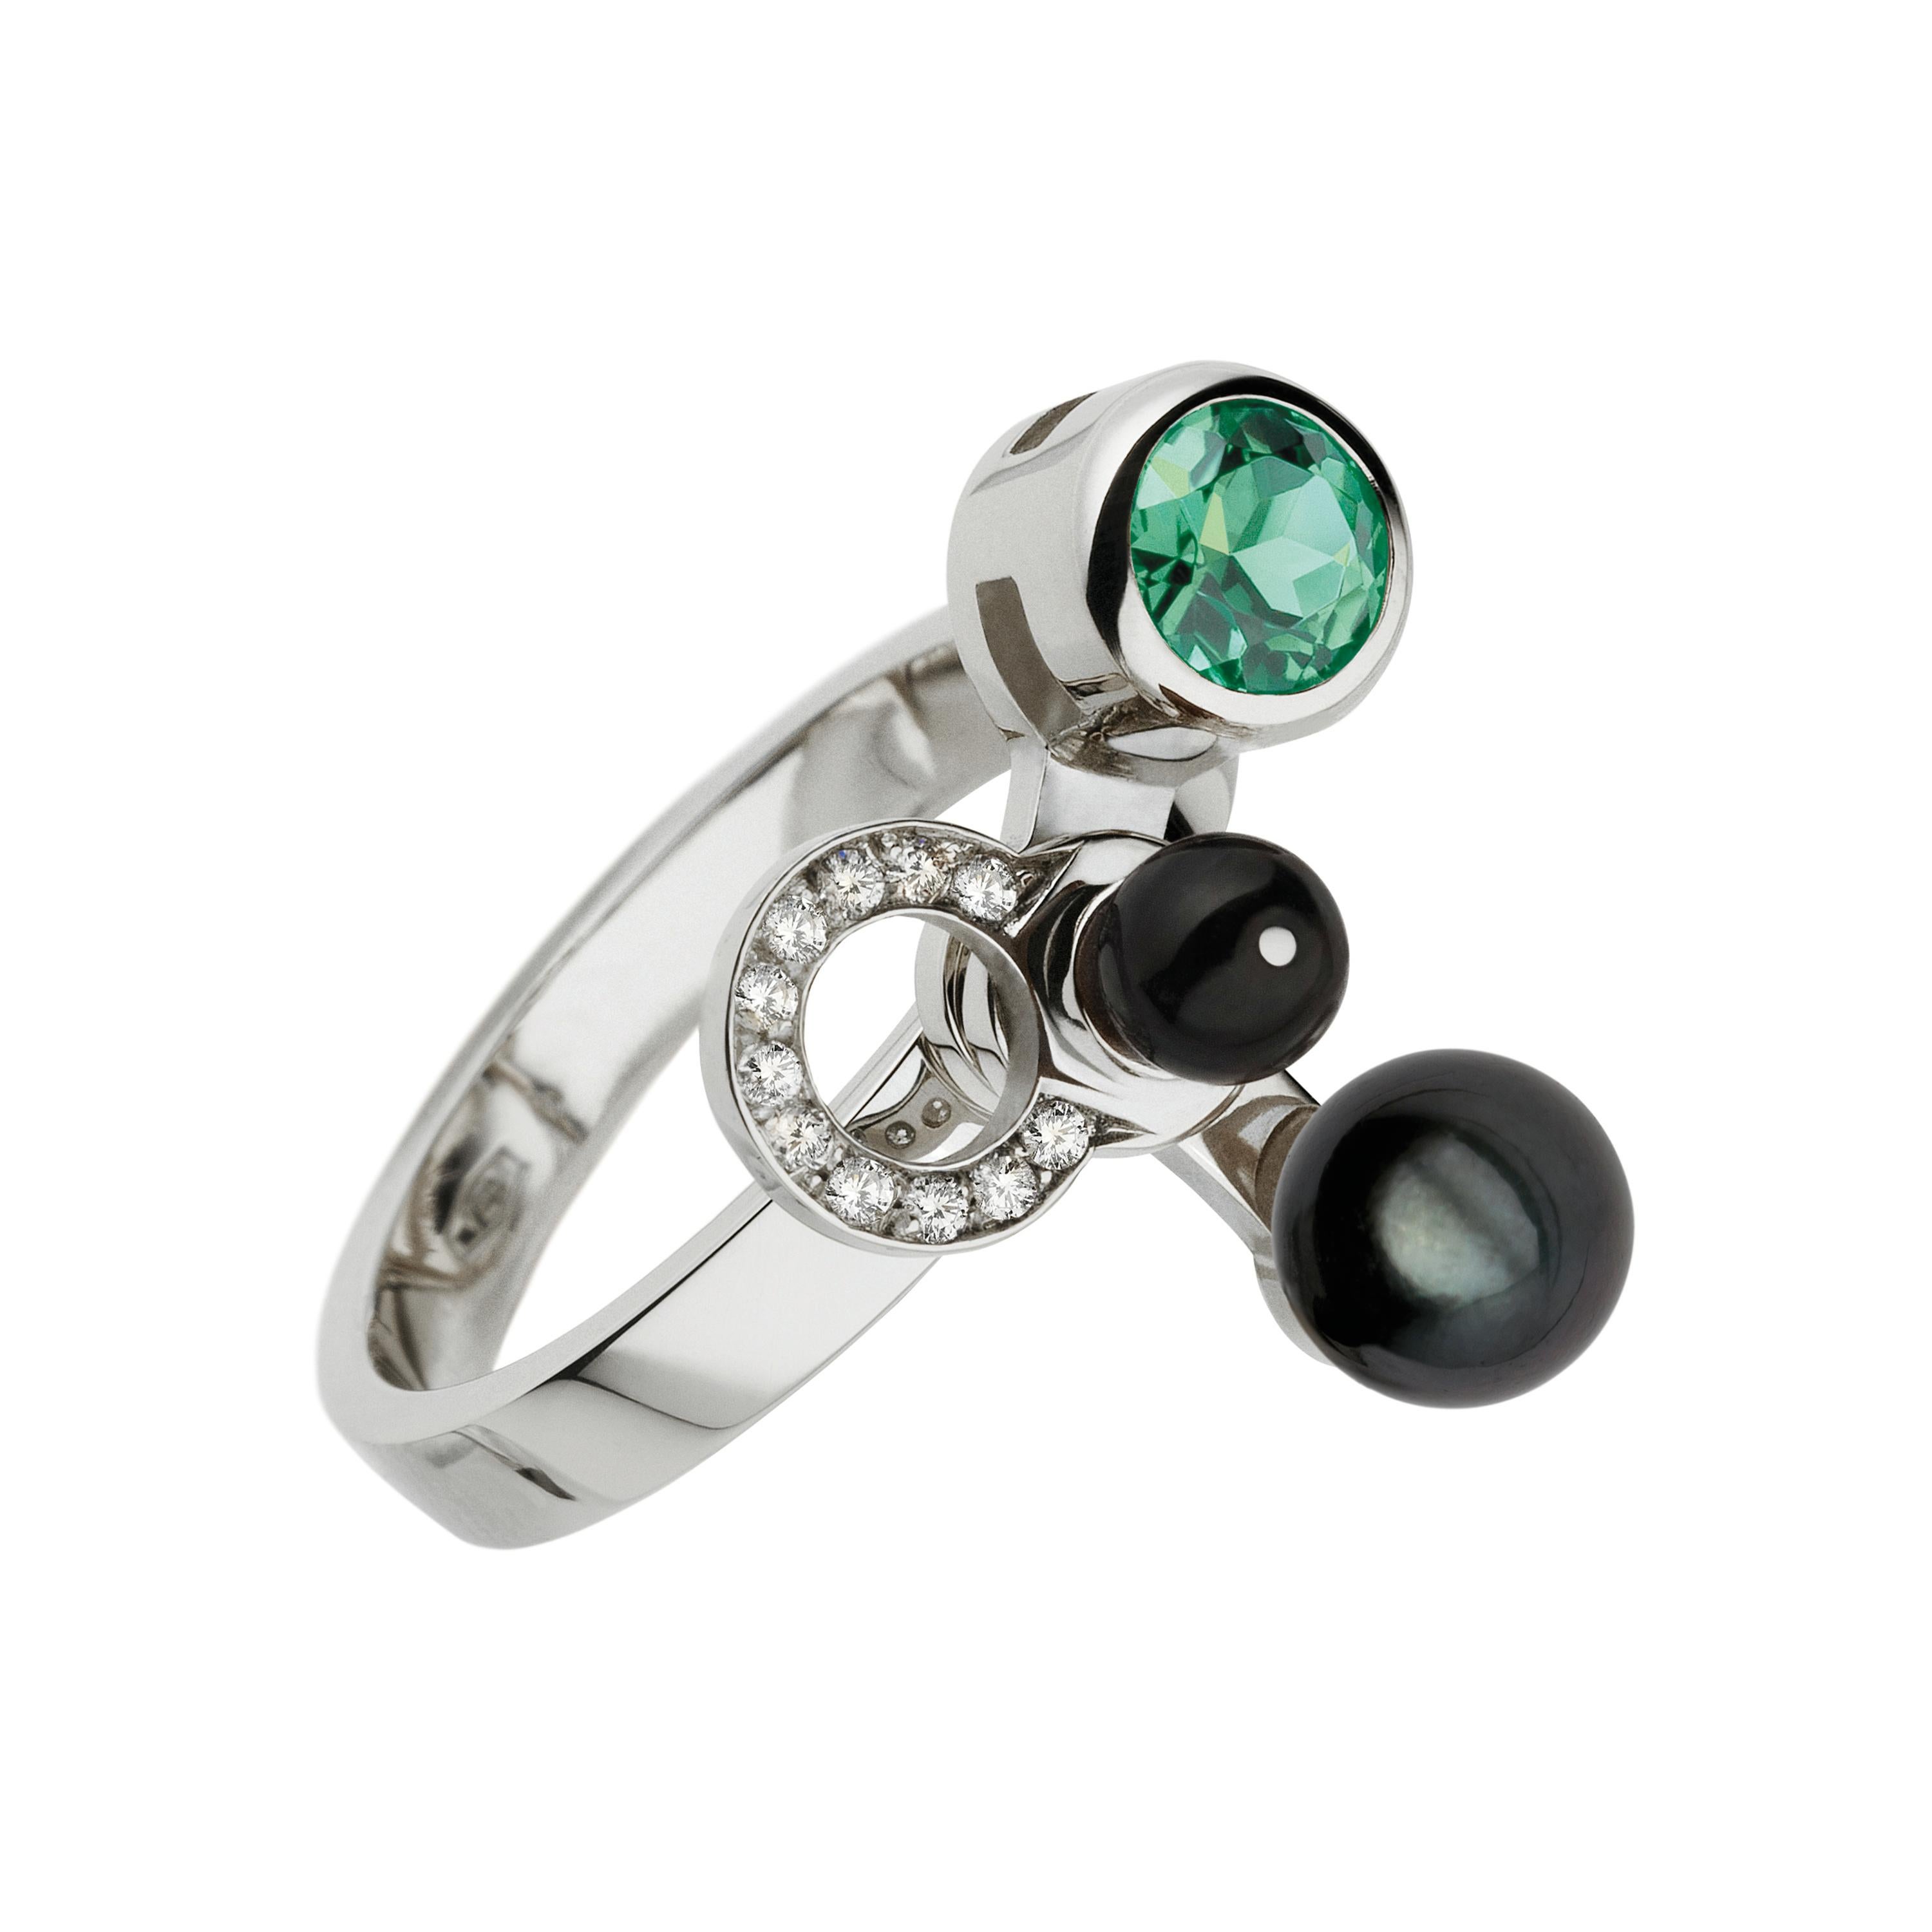 Round Cut Nathalie Jean Diamond Emerald Tourmaline Pearl Onyx Gold Colorful Cocktail Rings